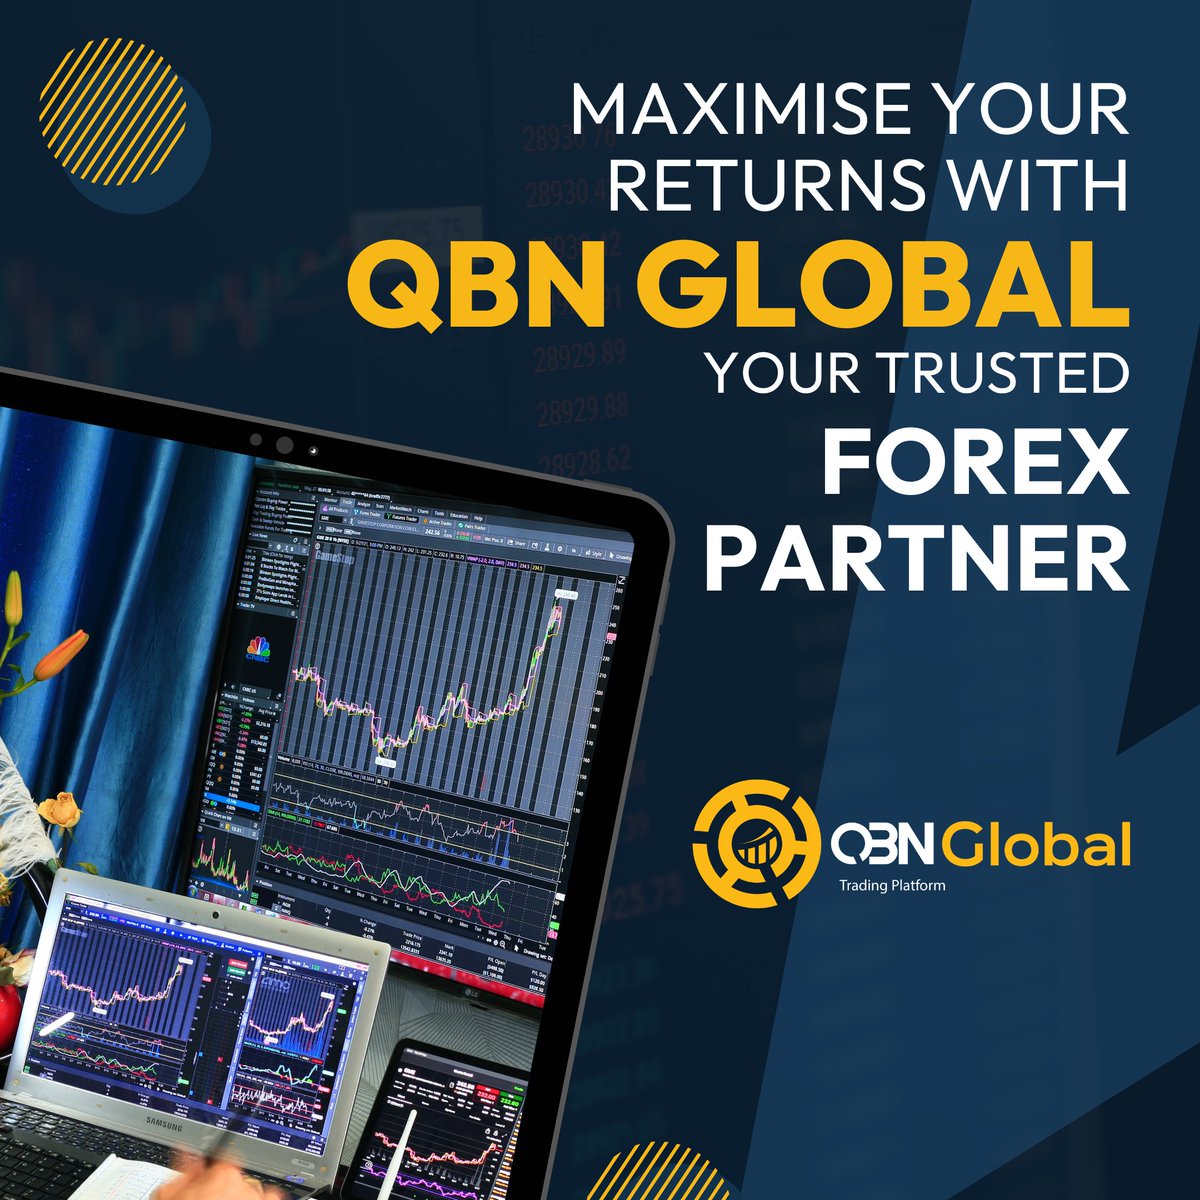 Maximize Your Returns with QBN Global, Your Trusted Forex Partner
qbnglobal.com
#forexbroker #InvestmentOpportunity #trustedforexpartner #qbnglobal #forextrading #secureinvestment #globalforex #ReliableBroker #QBN